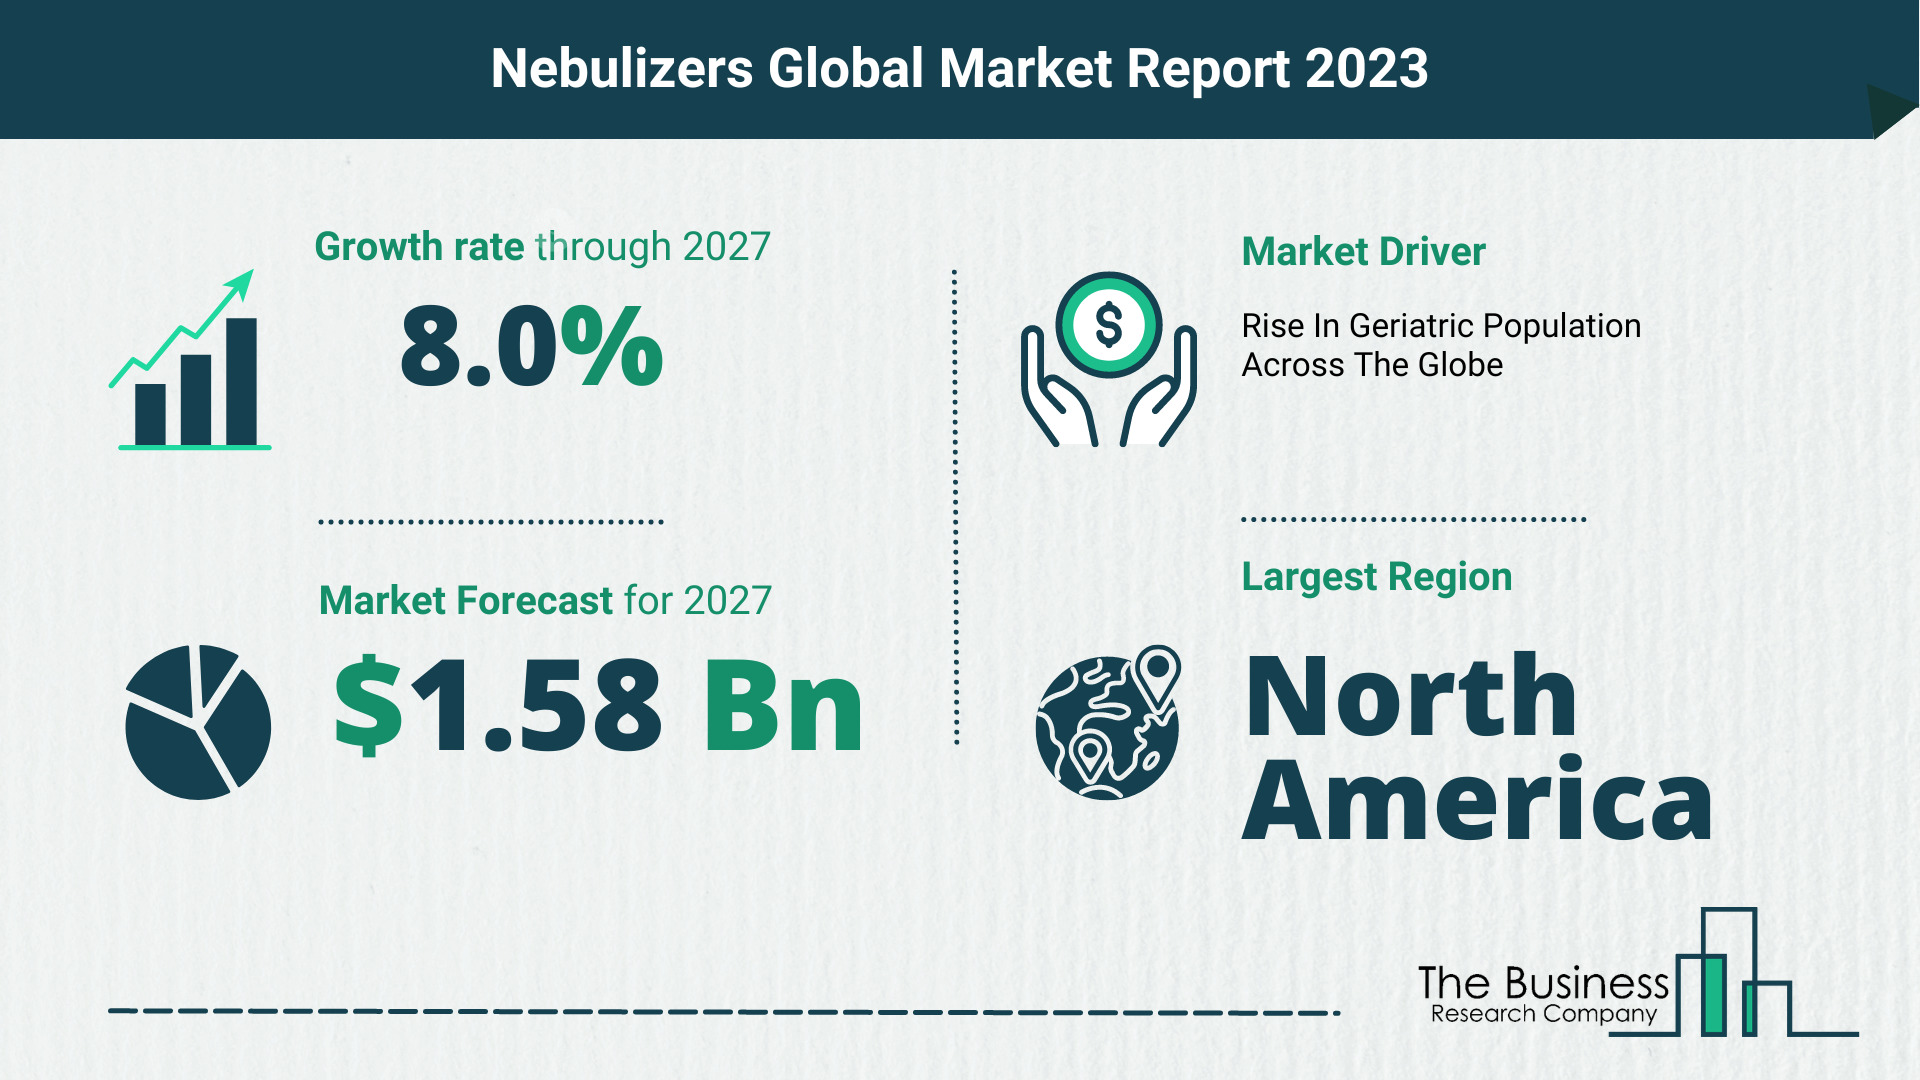 Global Nebulizers Market Opportunities And Strategies 2023